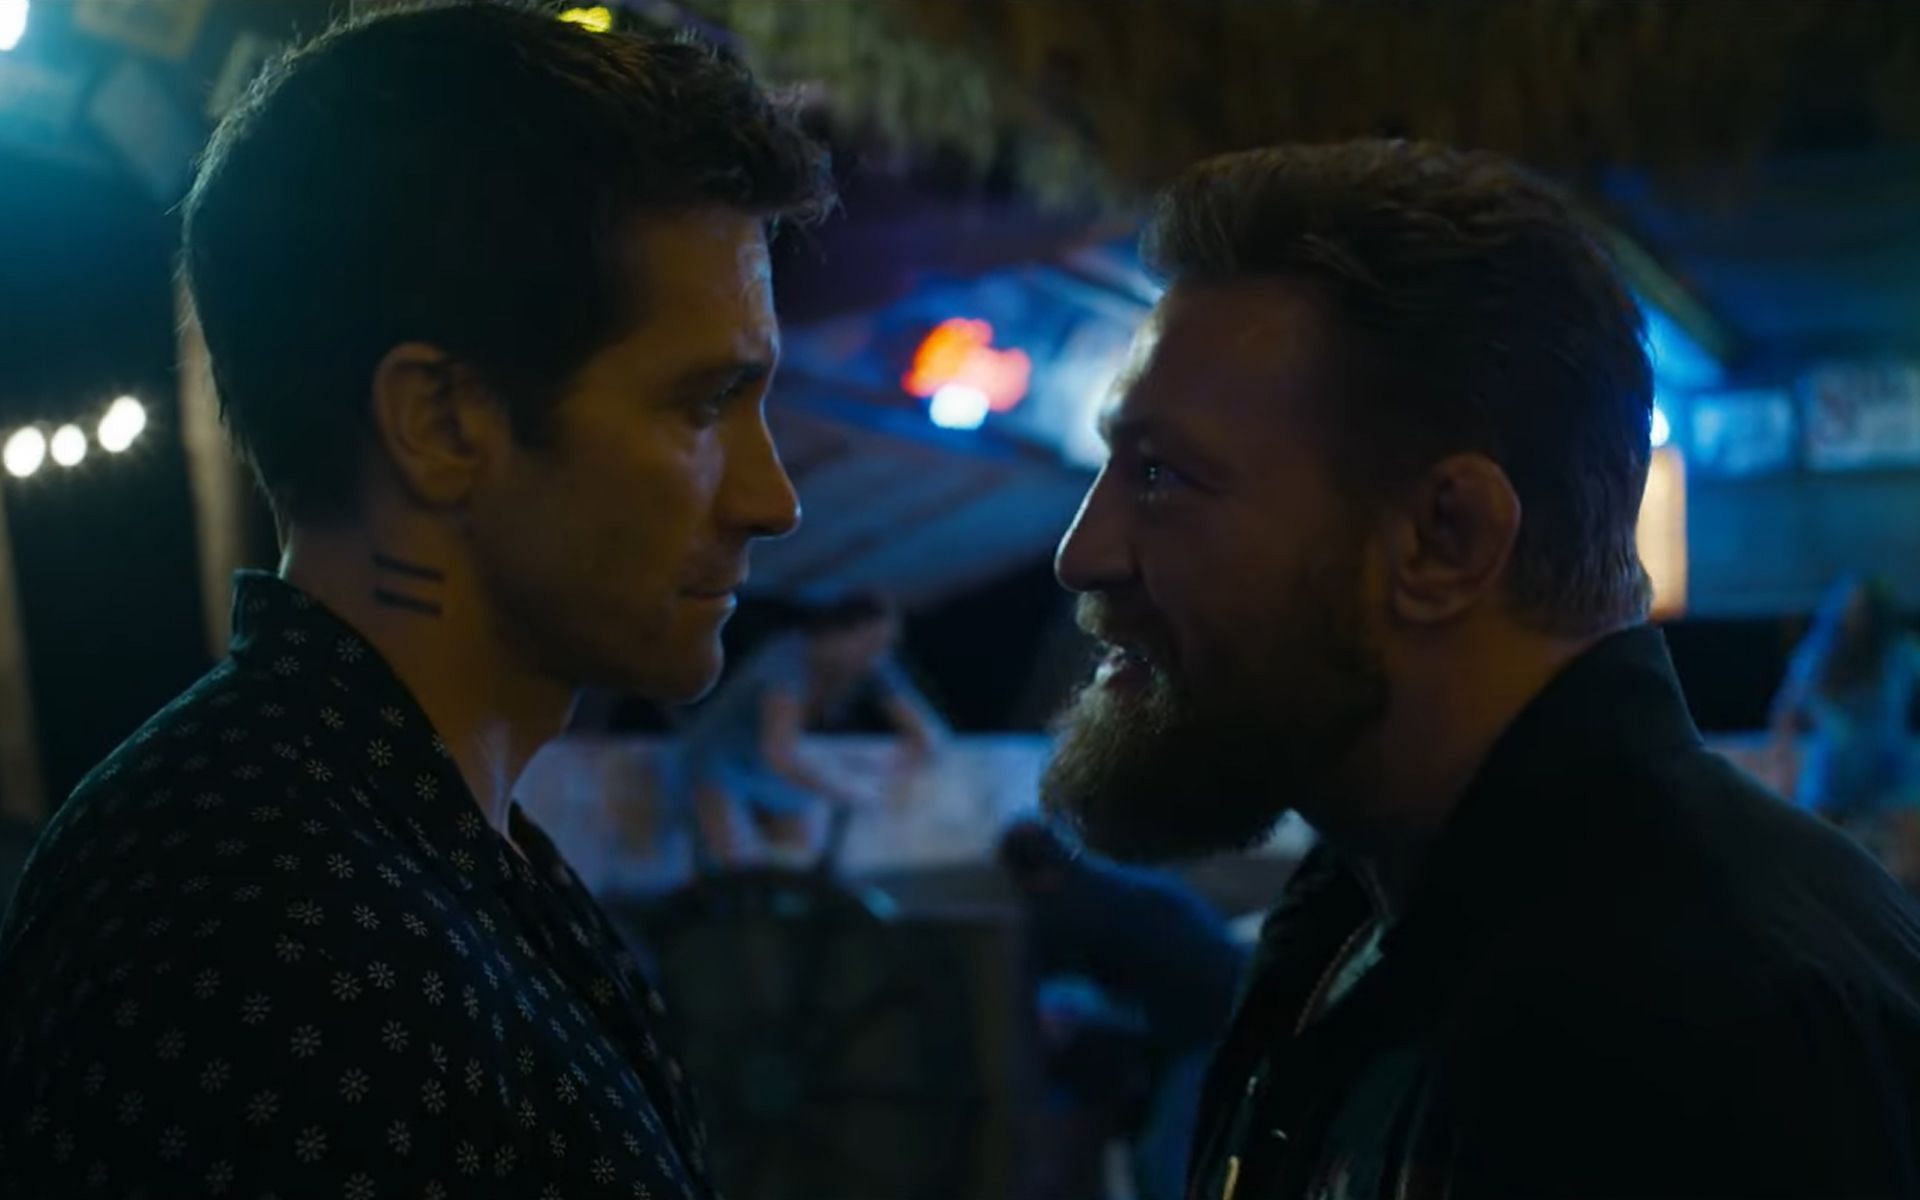 Jake Gyllenhaal (left) and Conor McGregor (right) in the Road House trailer [Image Courtesy: Prime Video YouTube]